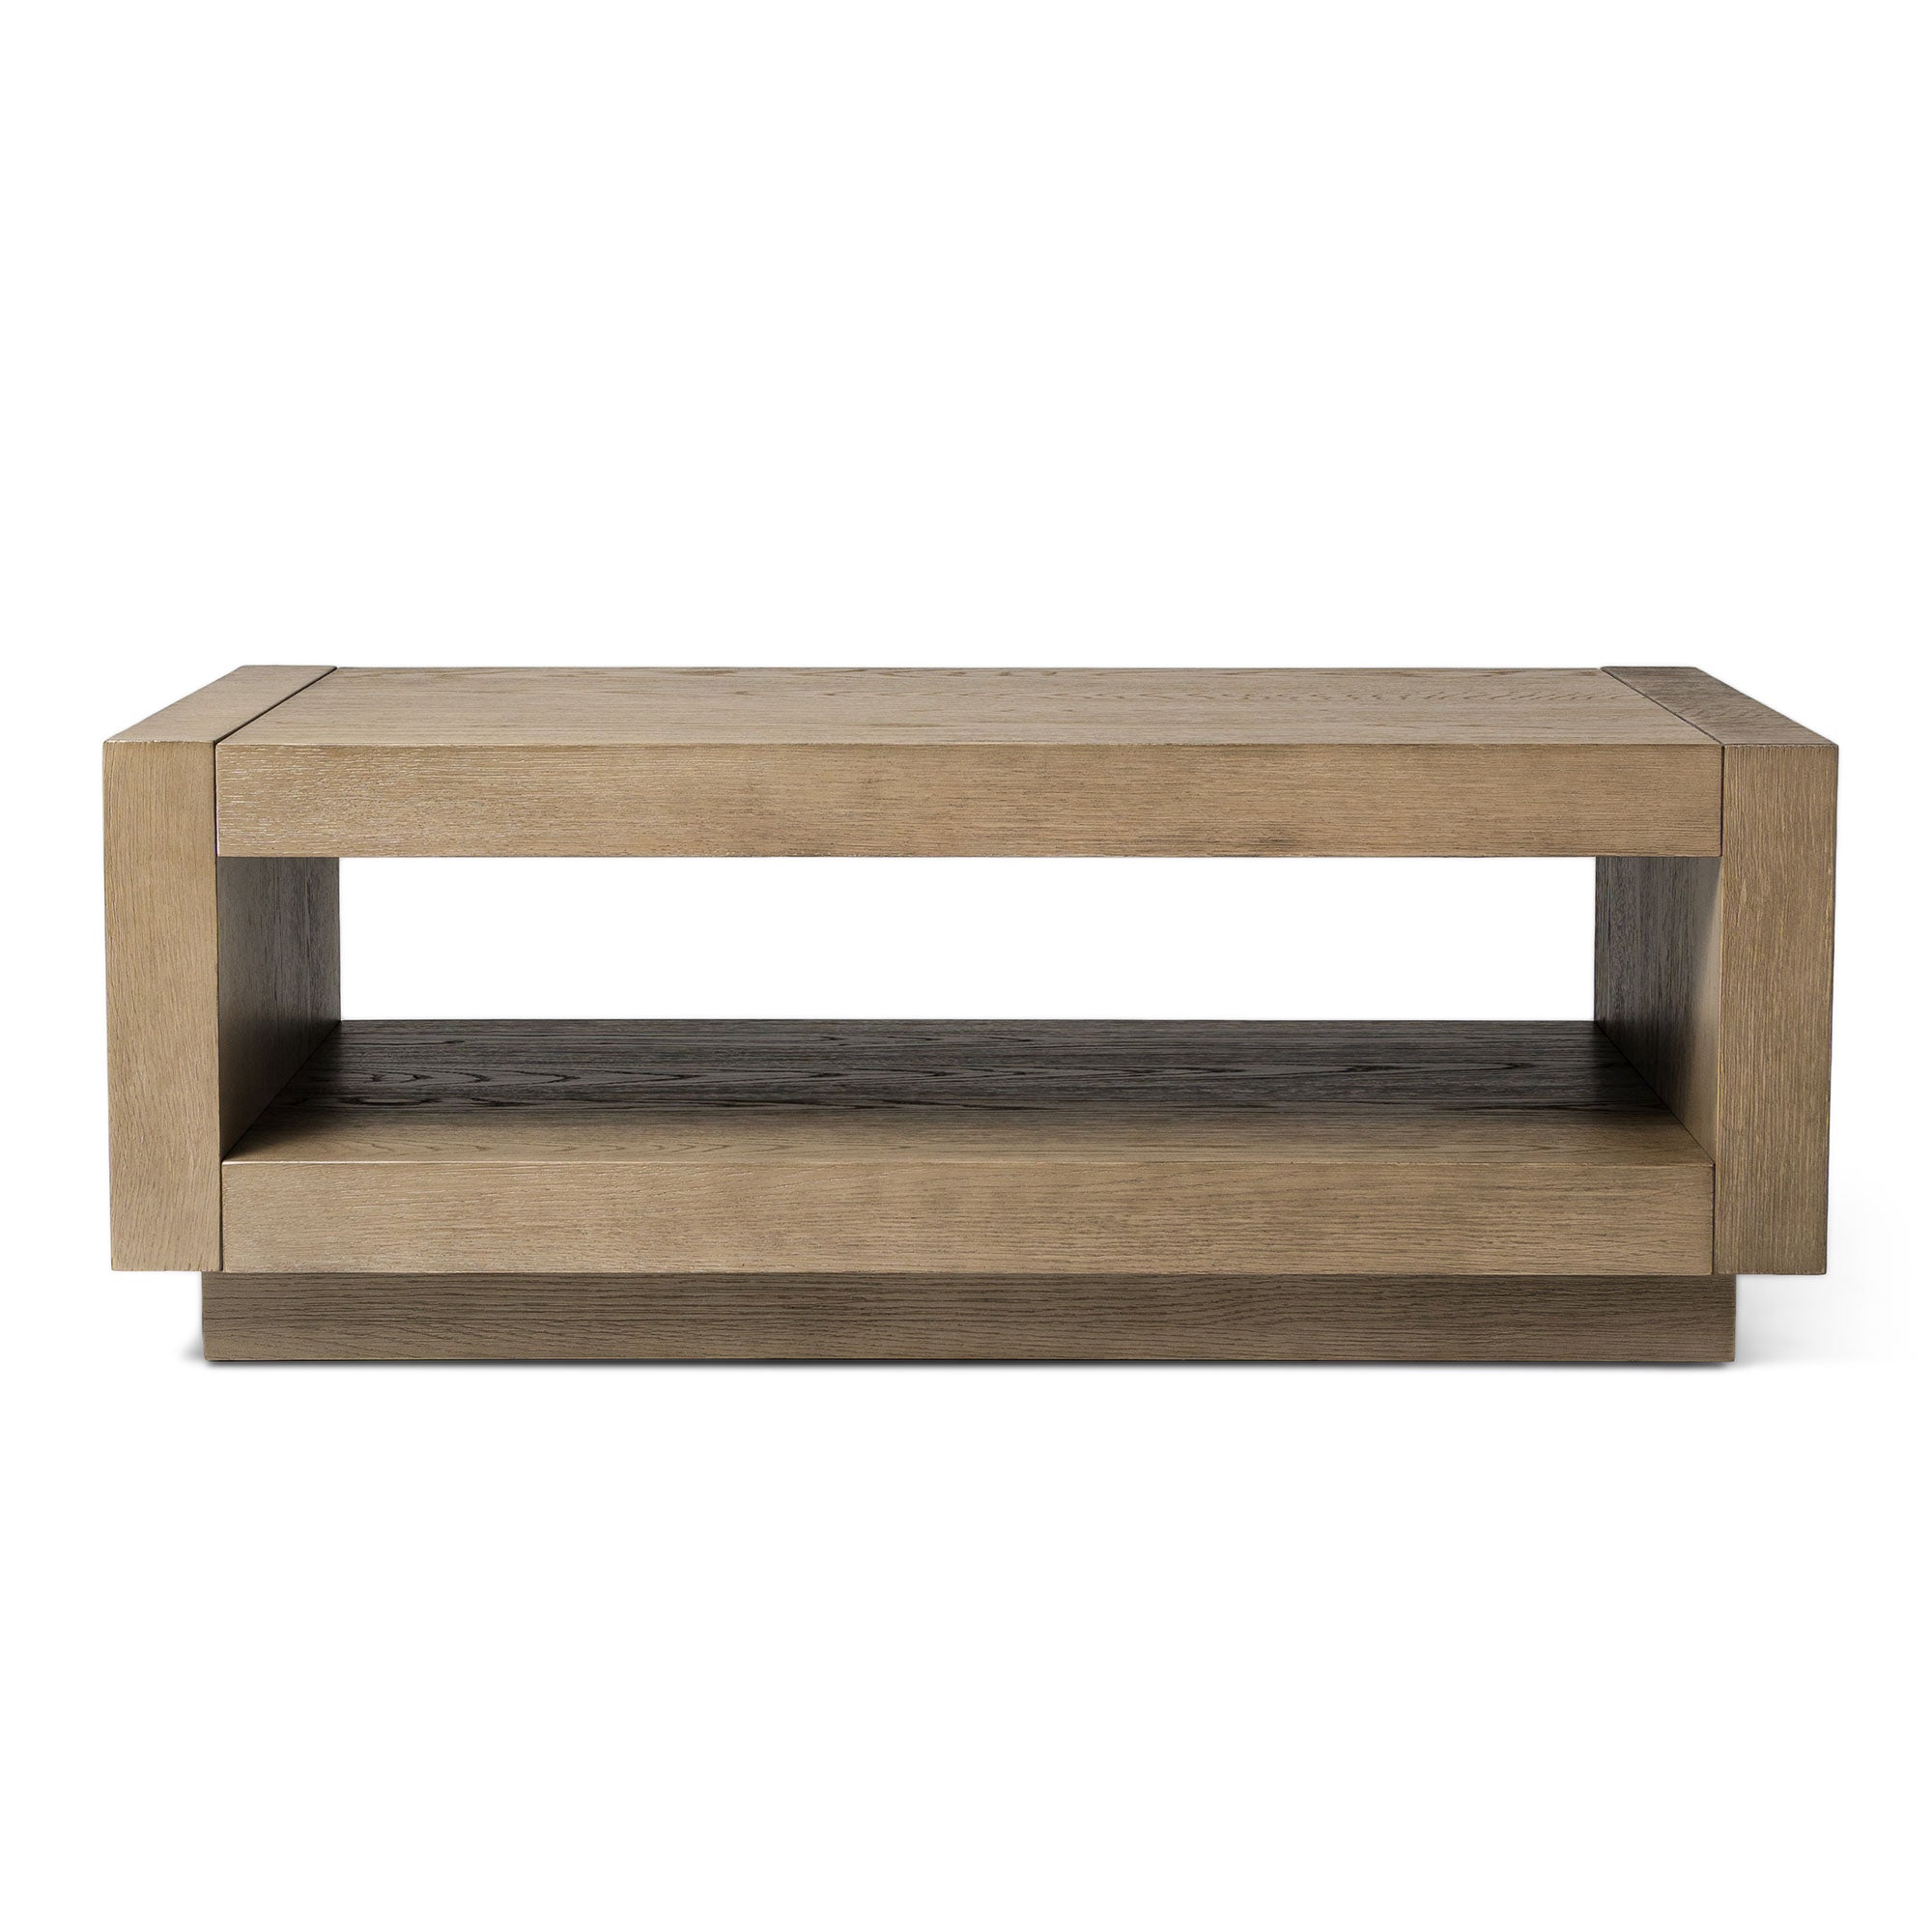 Artemis Contemporary Wooden Coffee Table in Refined Grey Finish in Furniture | Tables | Accent Tables | Coffee Tables by Maven Lane